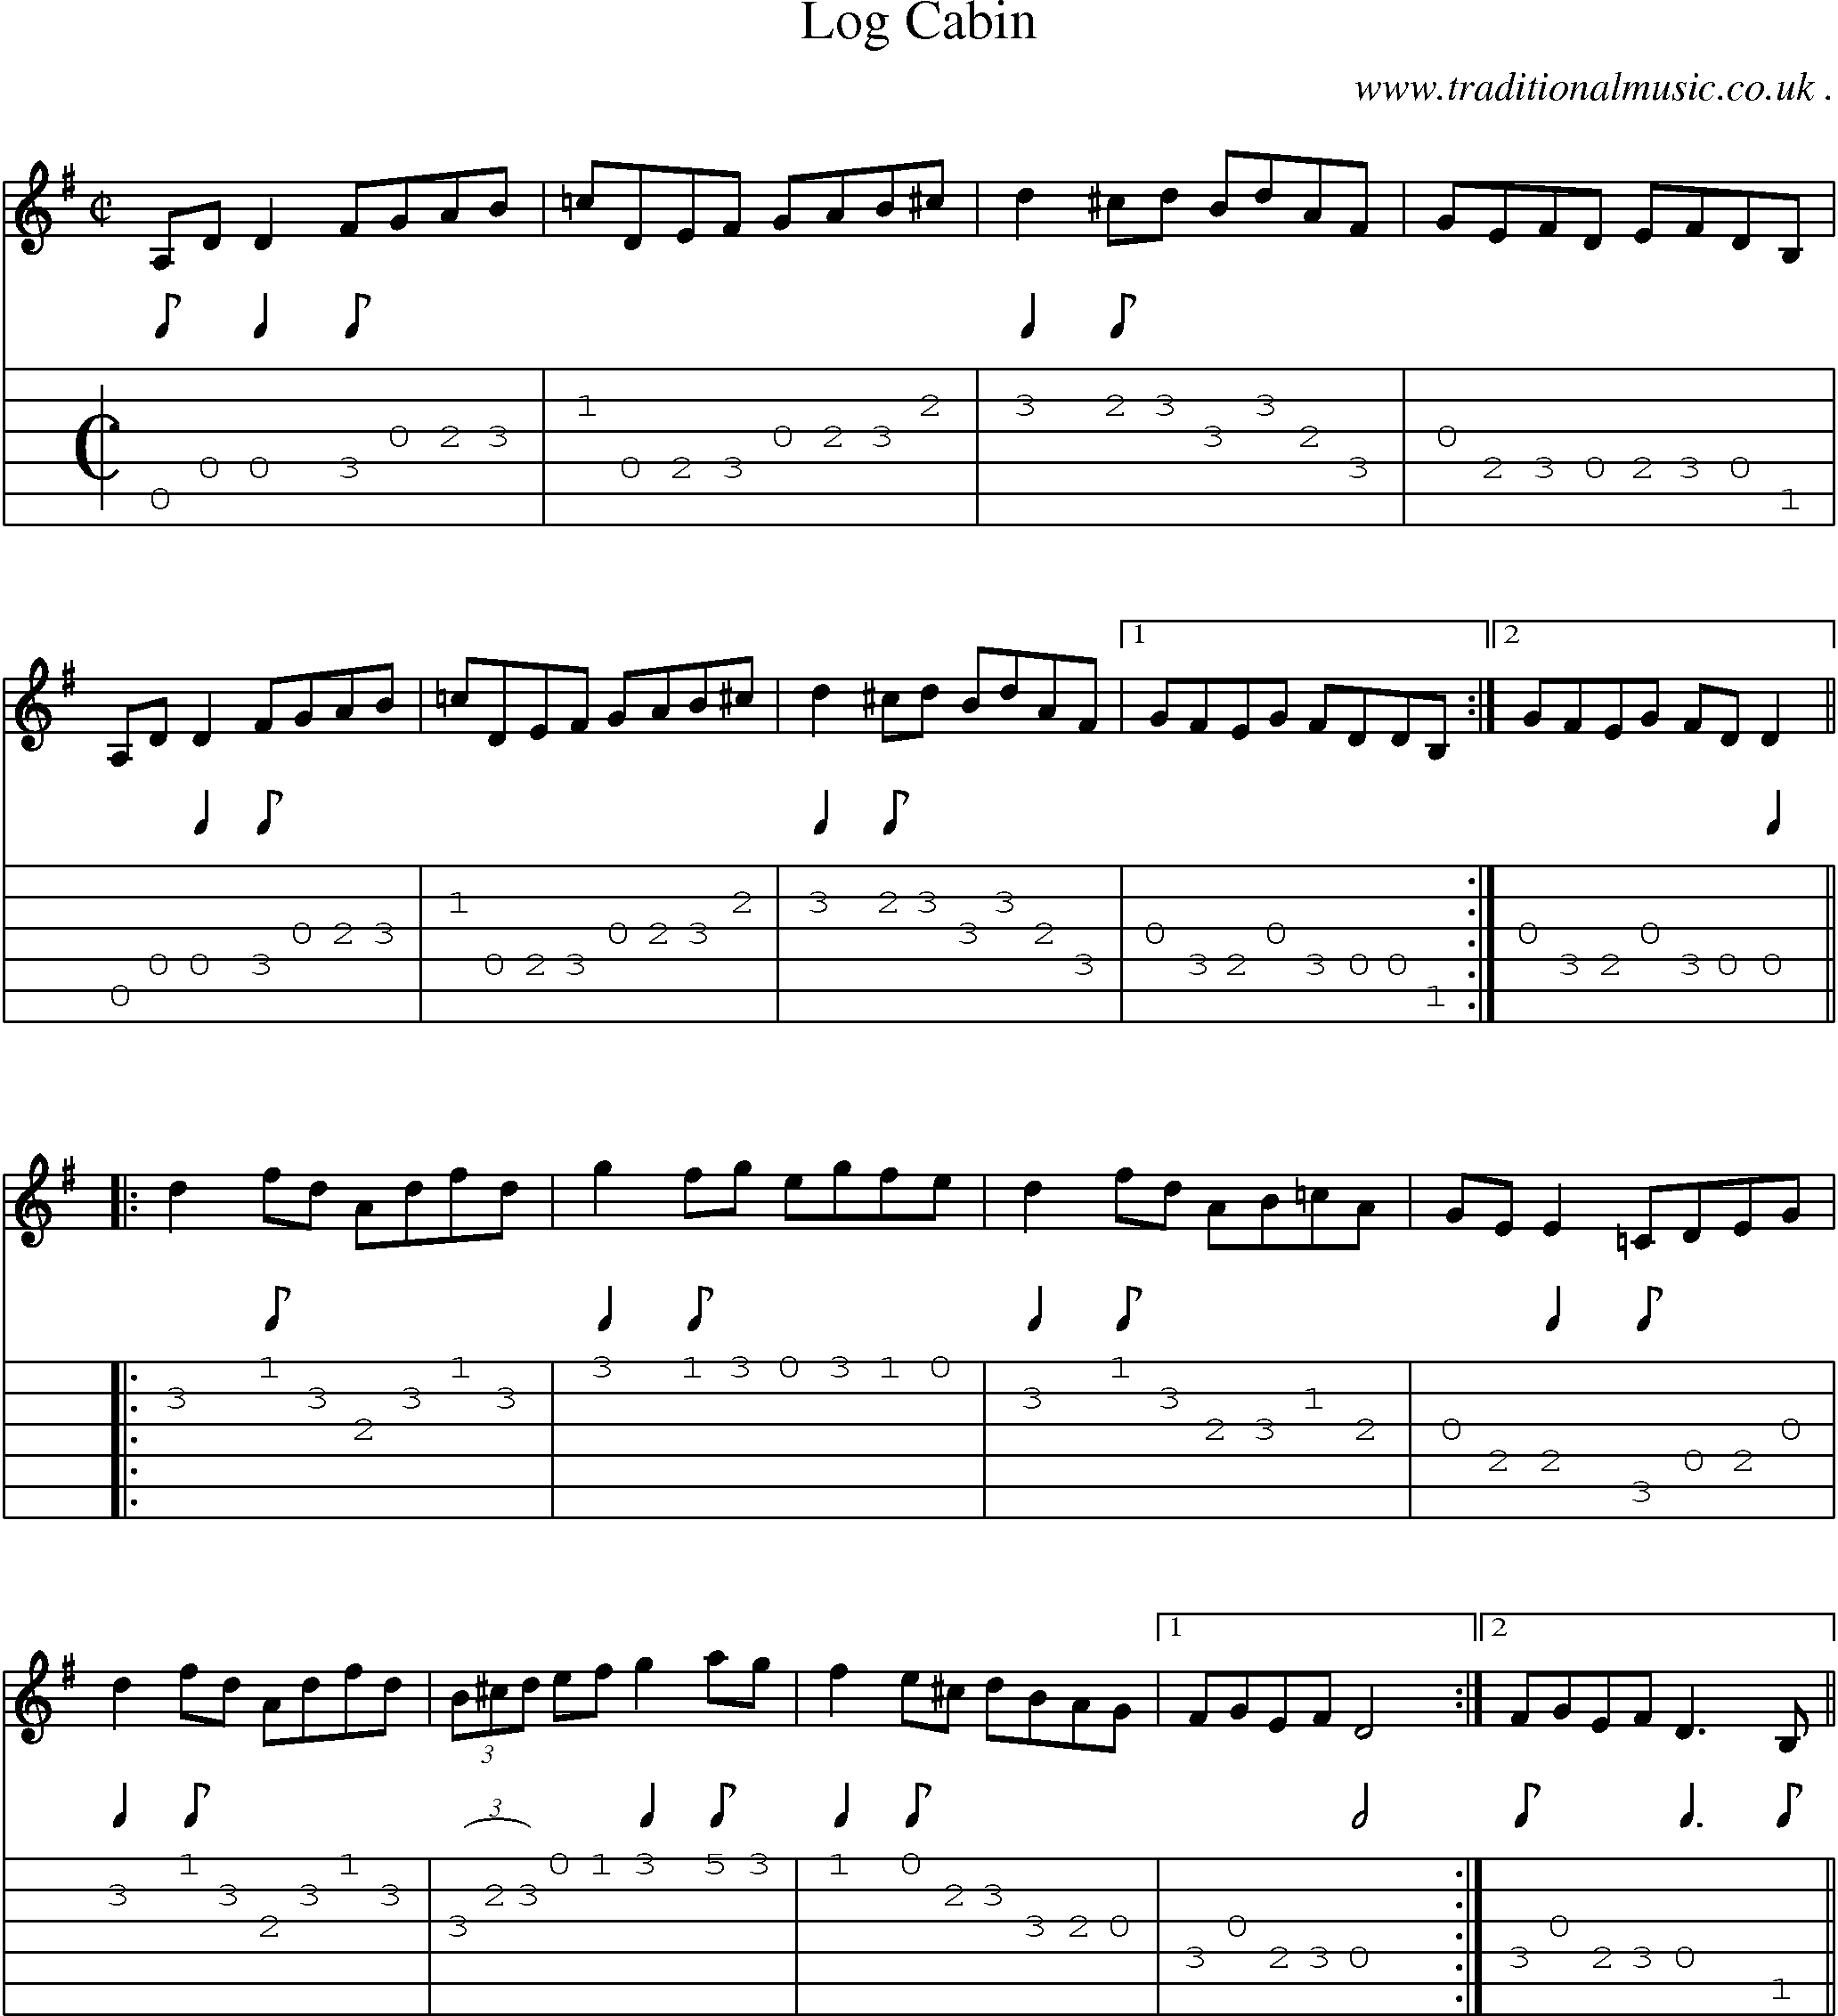 Sheet-Music and Guitar Tabs for Log Cabin